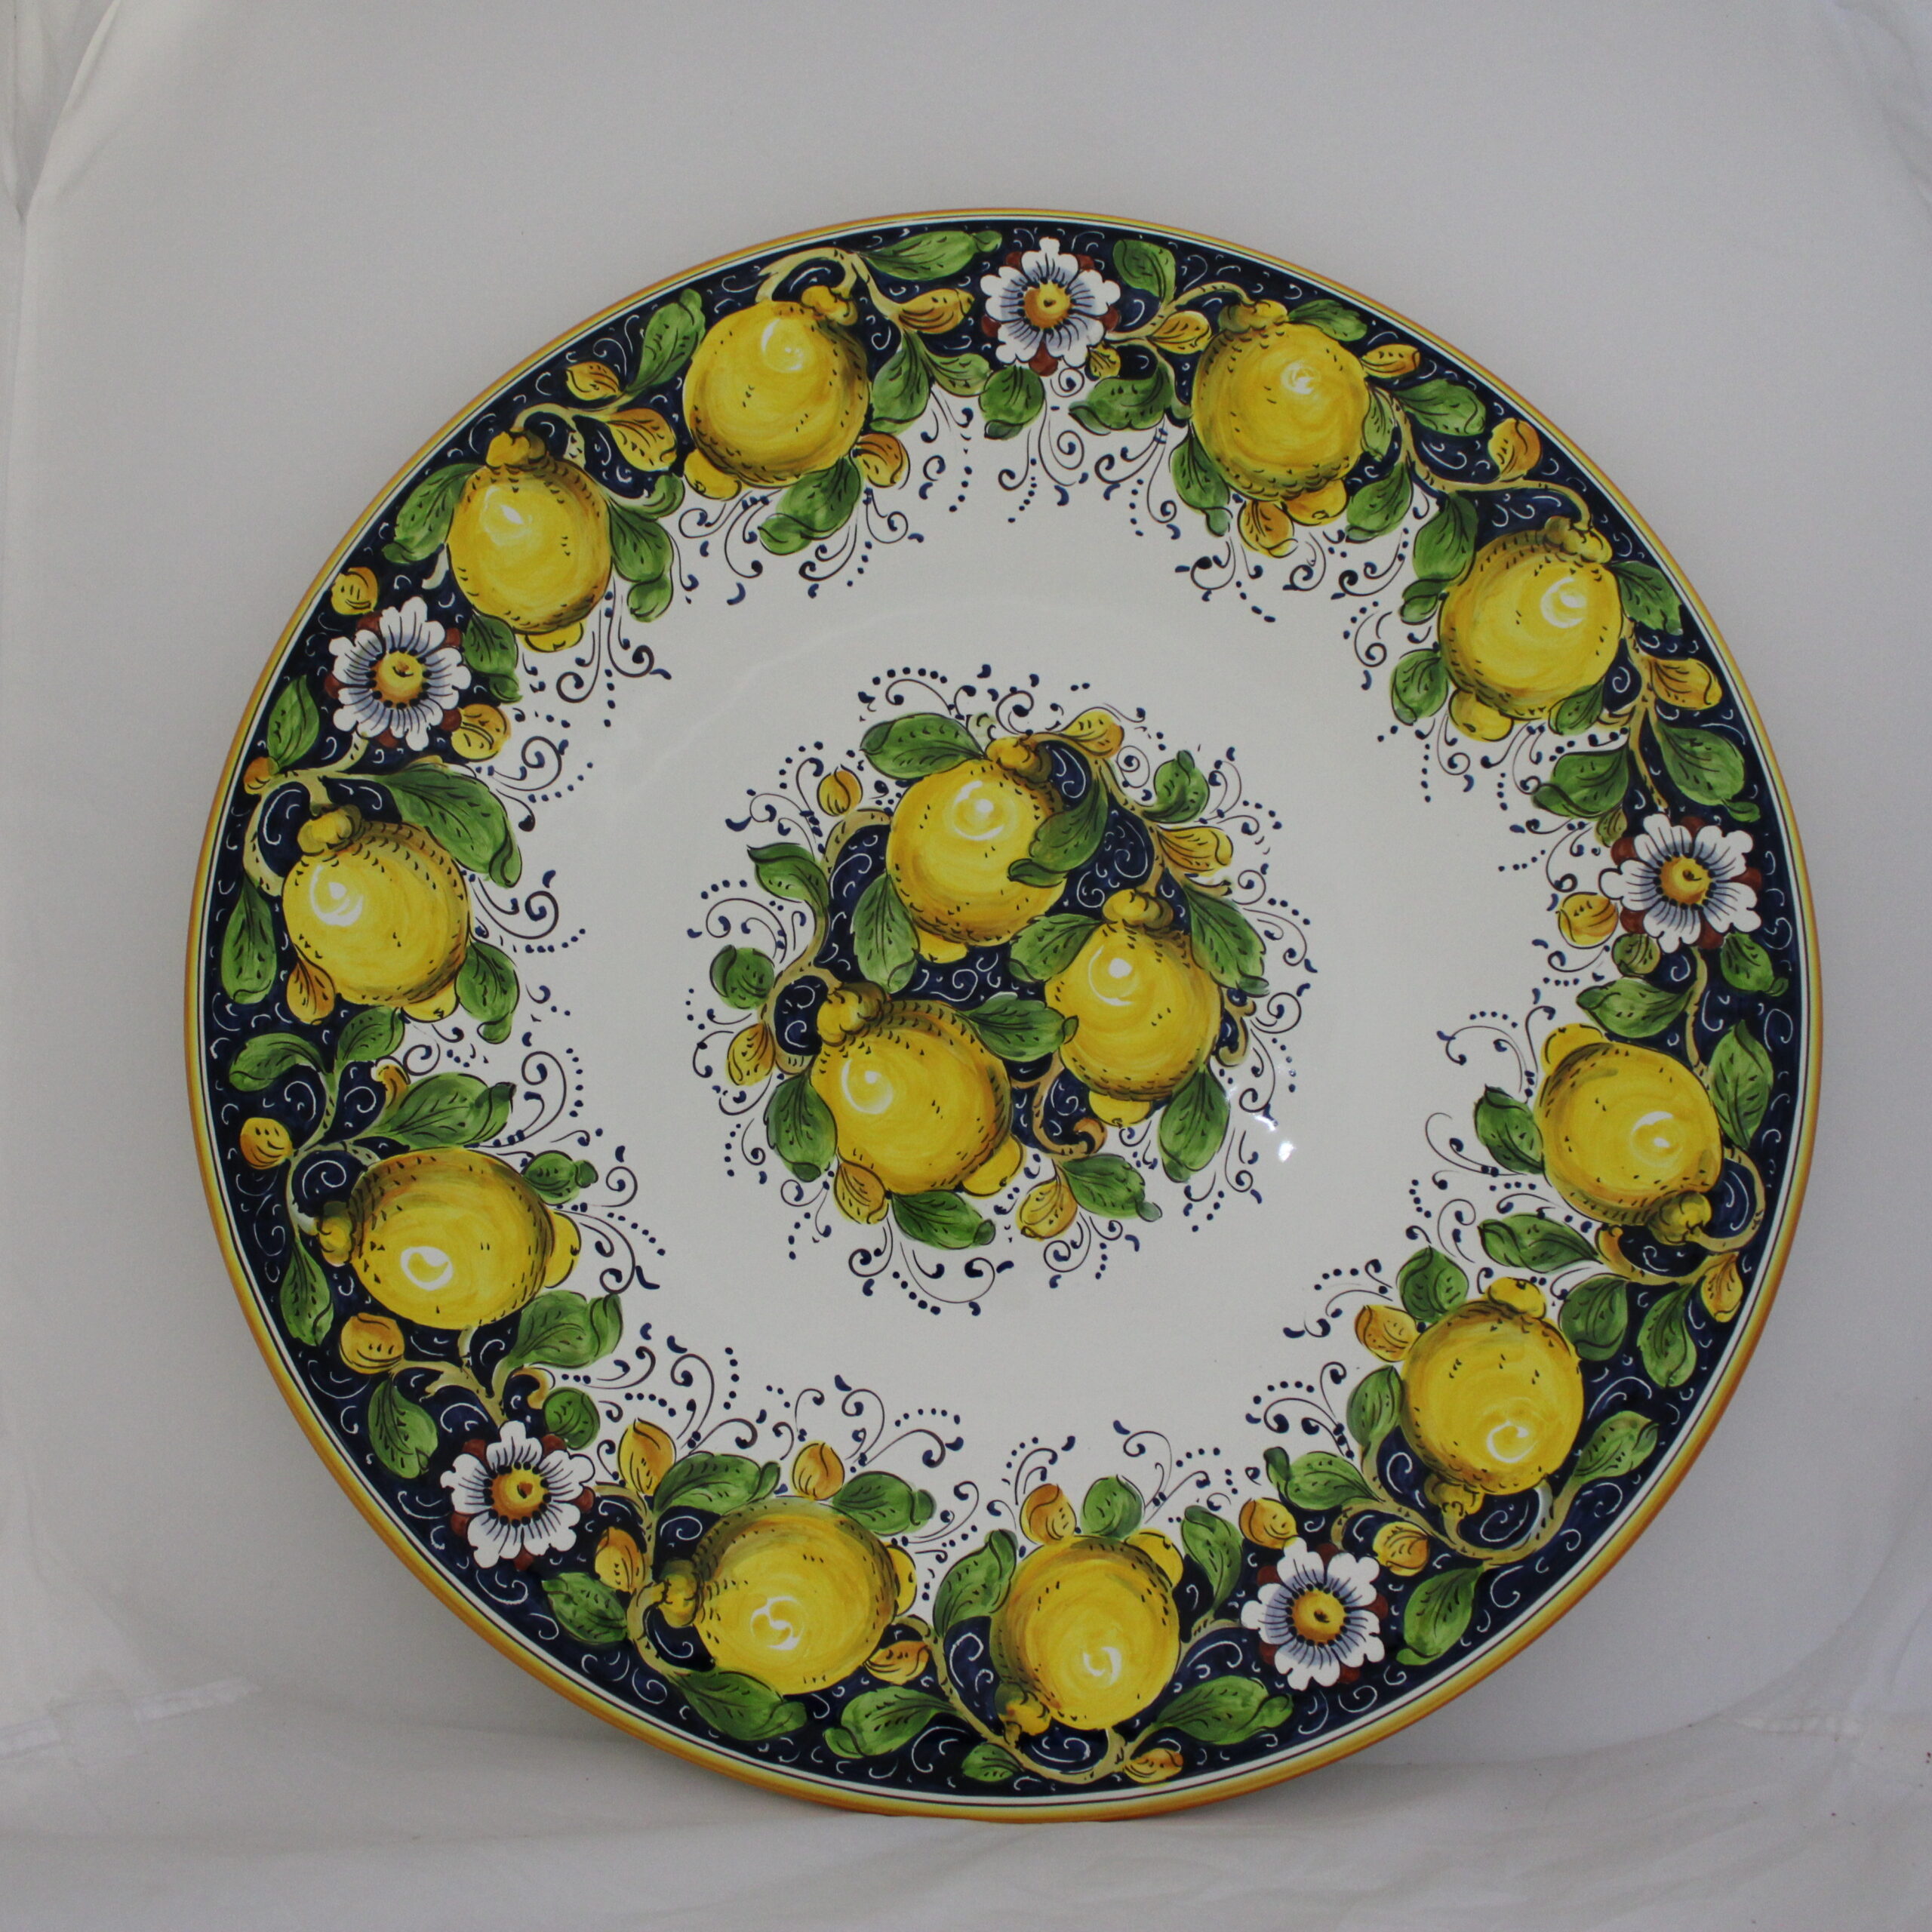 Wall and serving plate hand painted. Beautiful yellow lemons on blue background with white flowers and green and orange leaves.